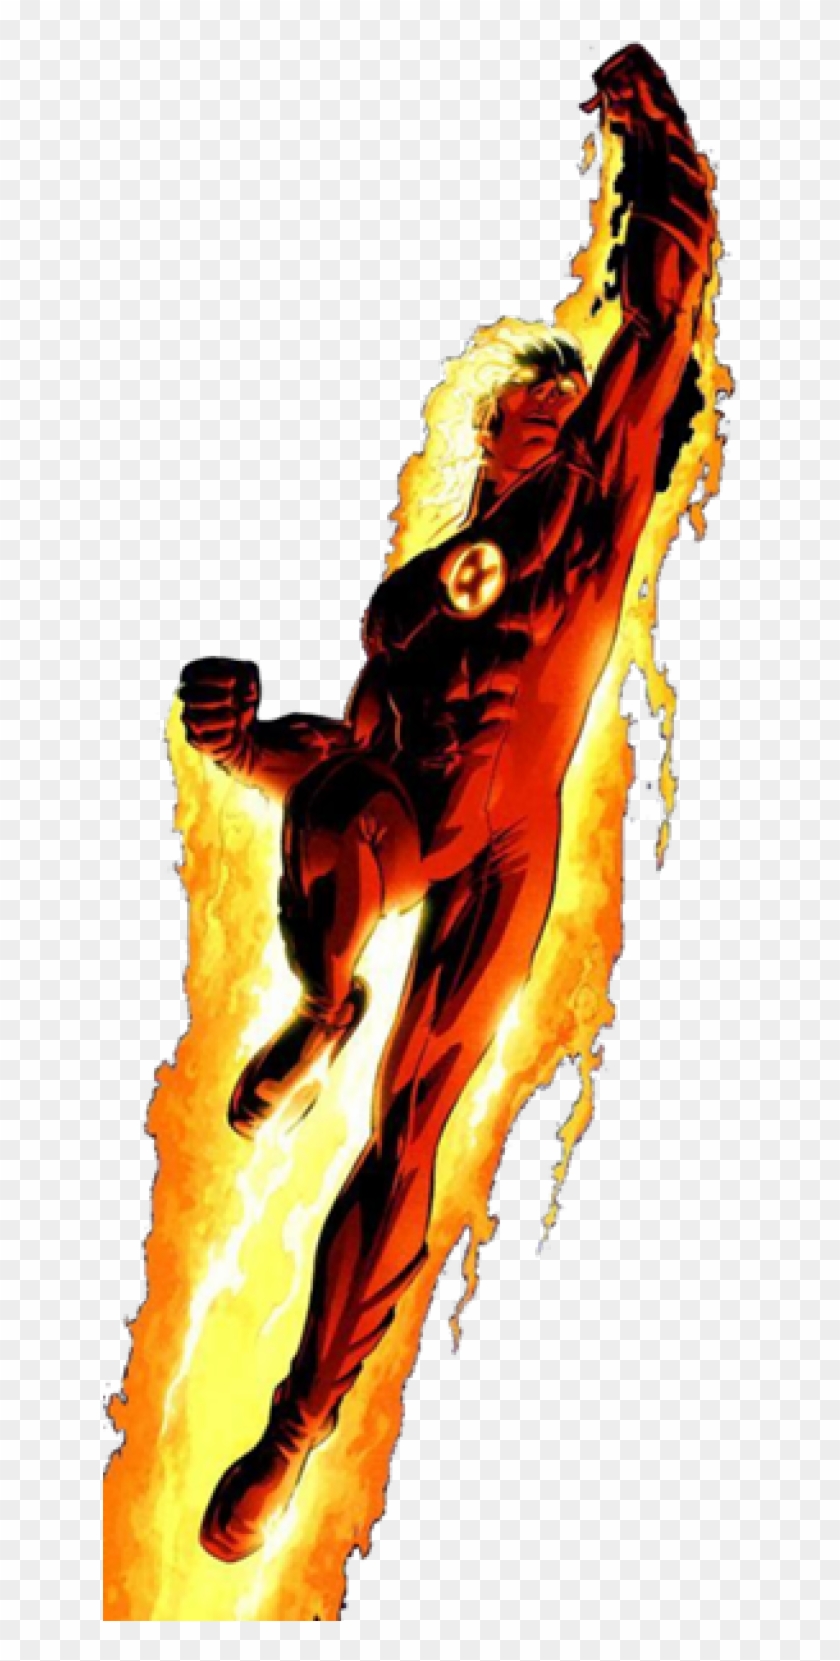 Marvel Fantastic Four Logo Images Gallery - Human Torch Transparent Clipart